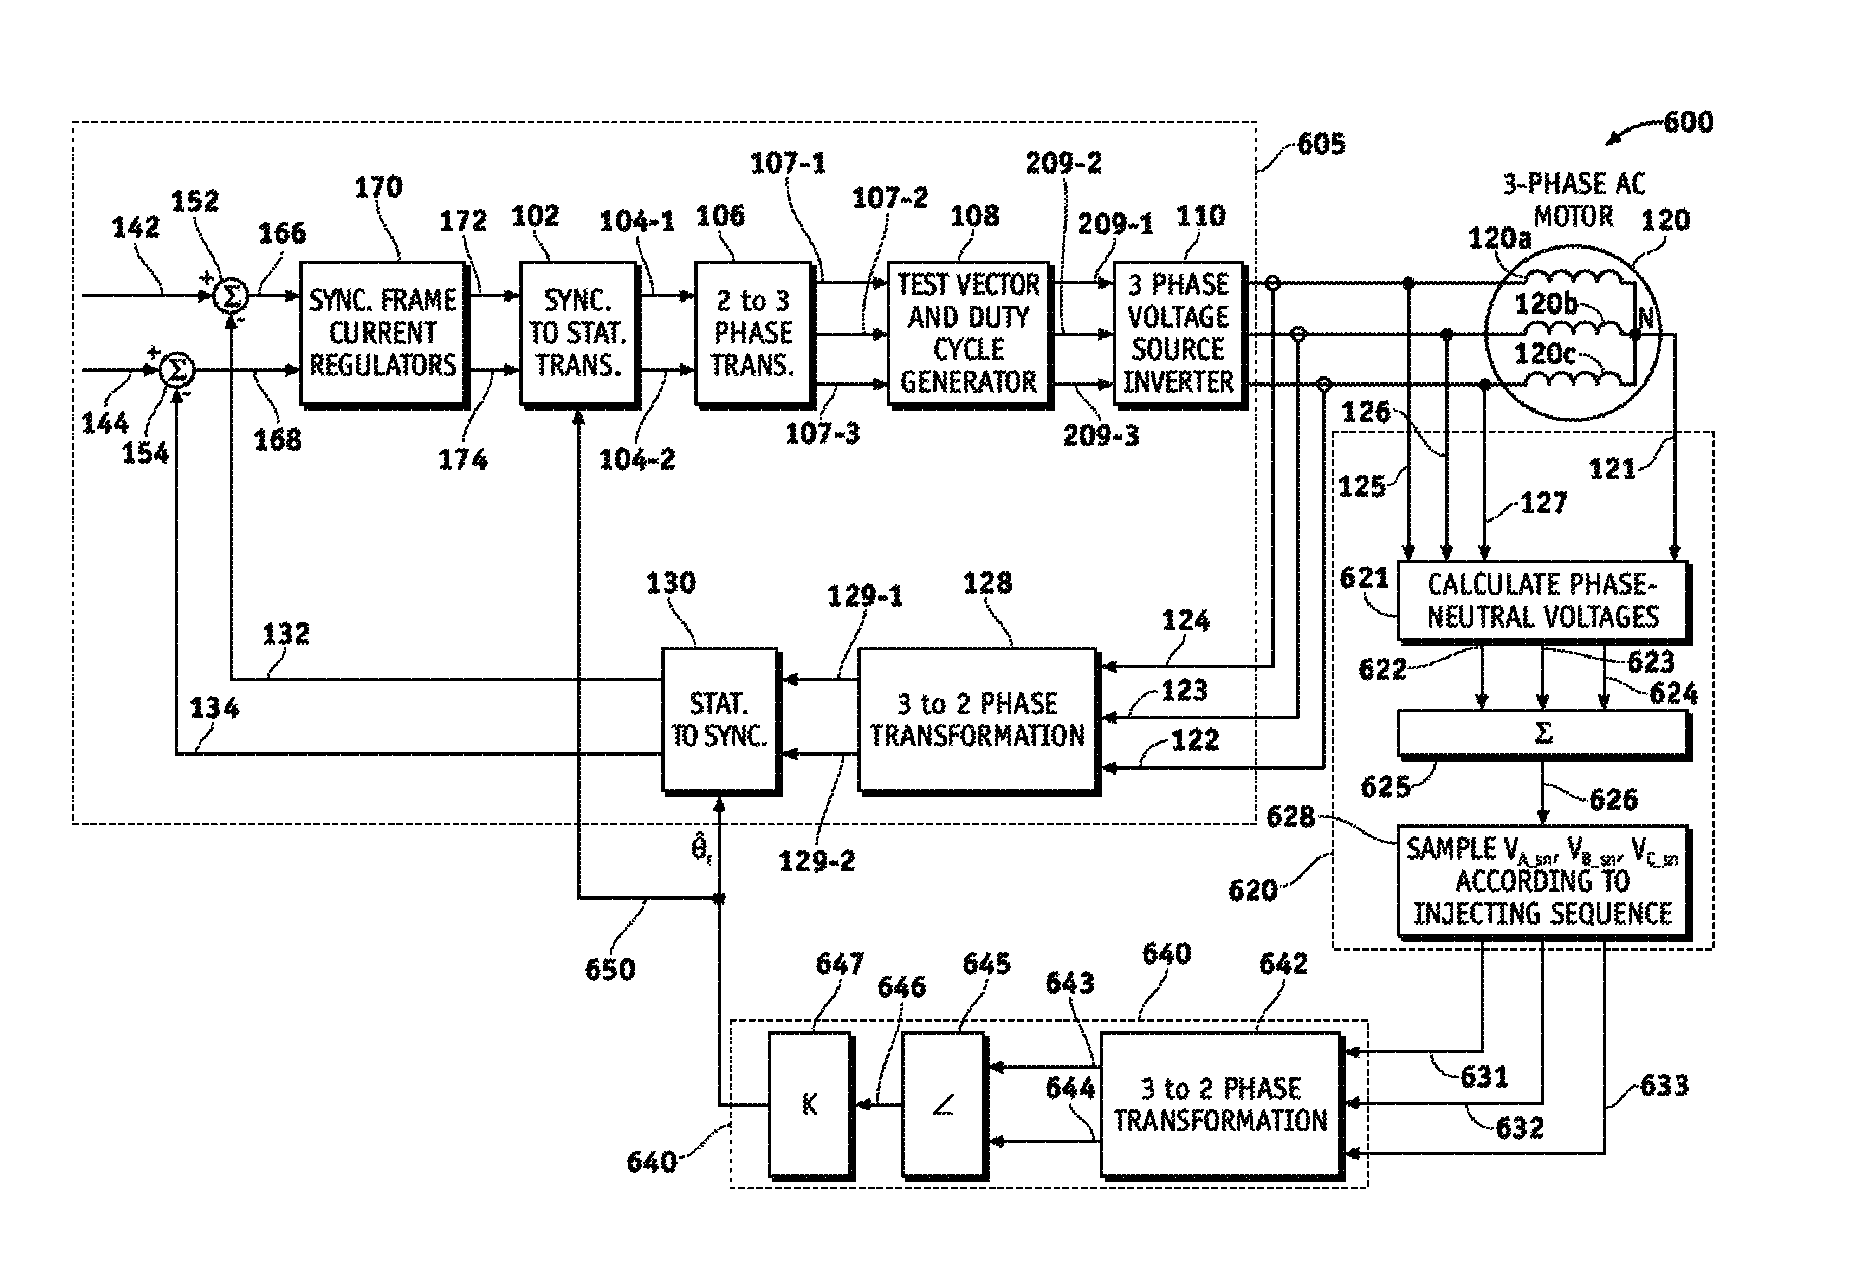 Vector controlled motor drive system implementing pulse width modulated (PWM) waveforms